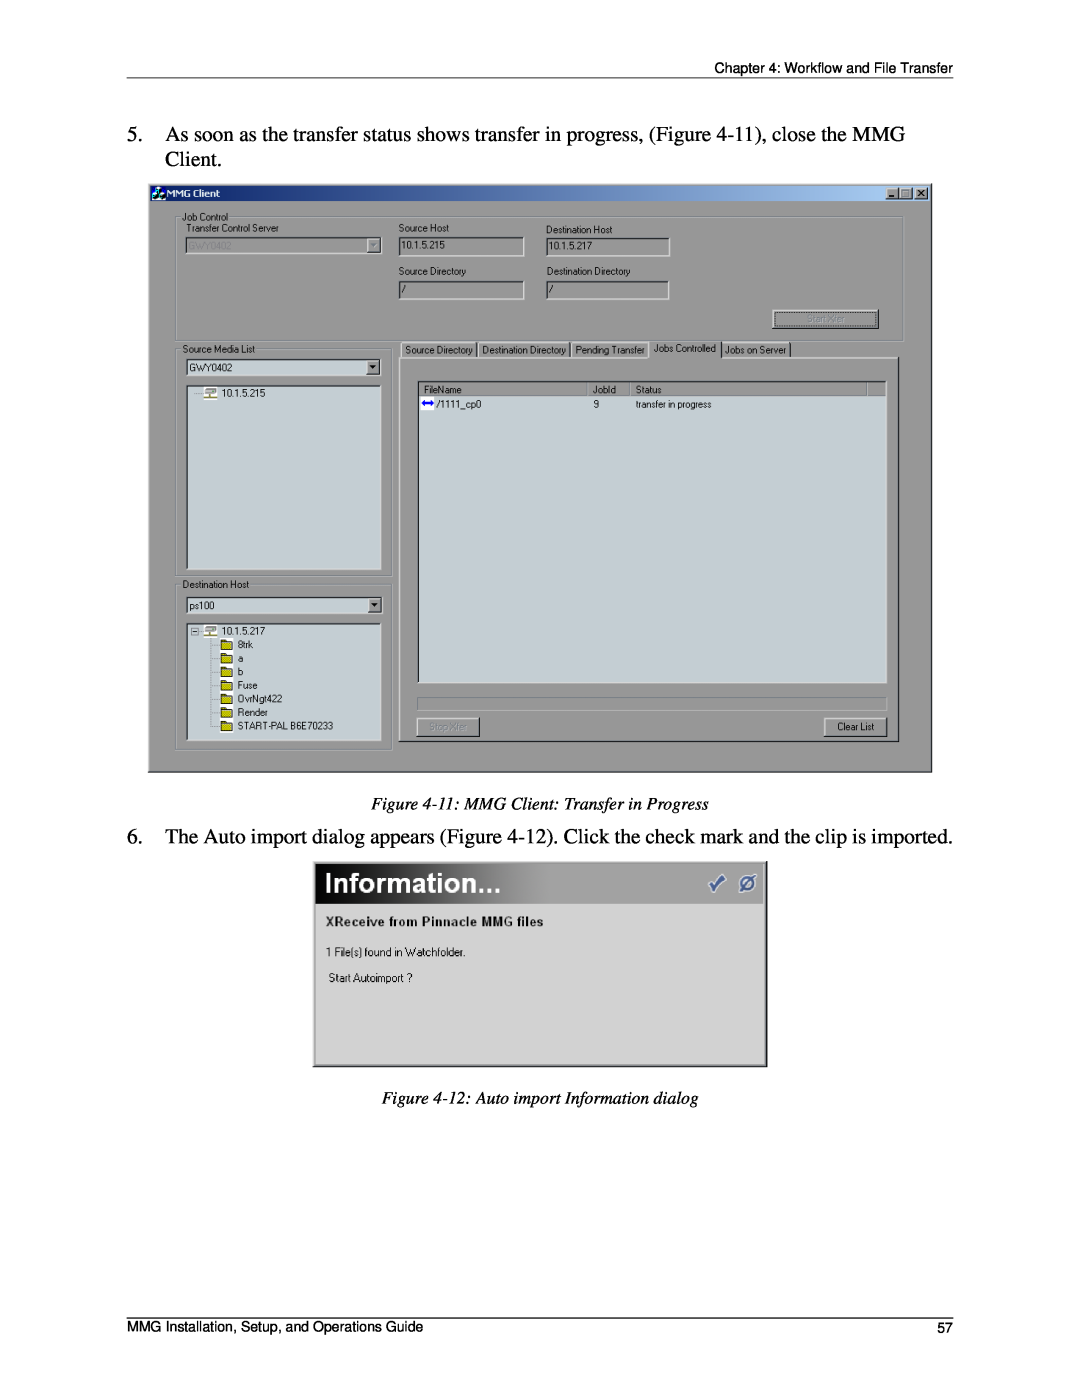 Pinnacle Design 37T100105 manual 11 MMG Client Transfer in Progress, 12 Auto import Information dialog 